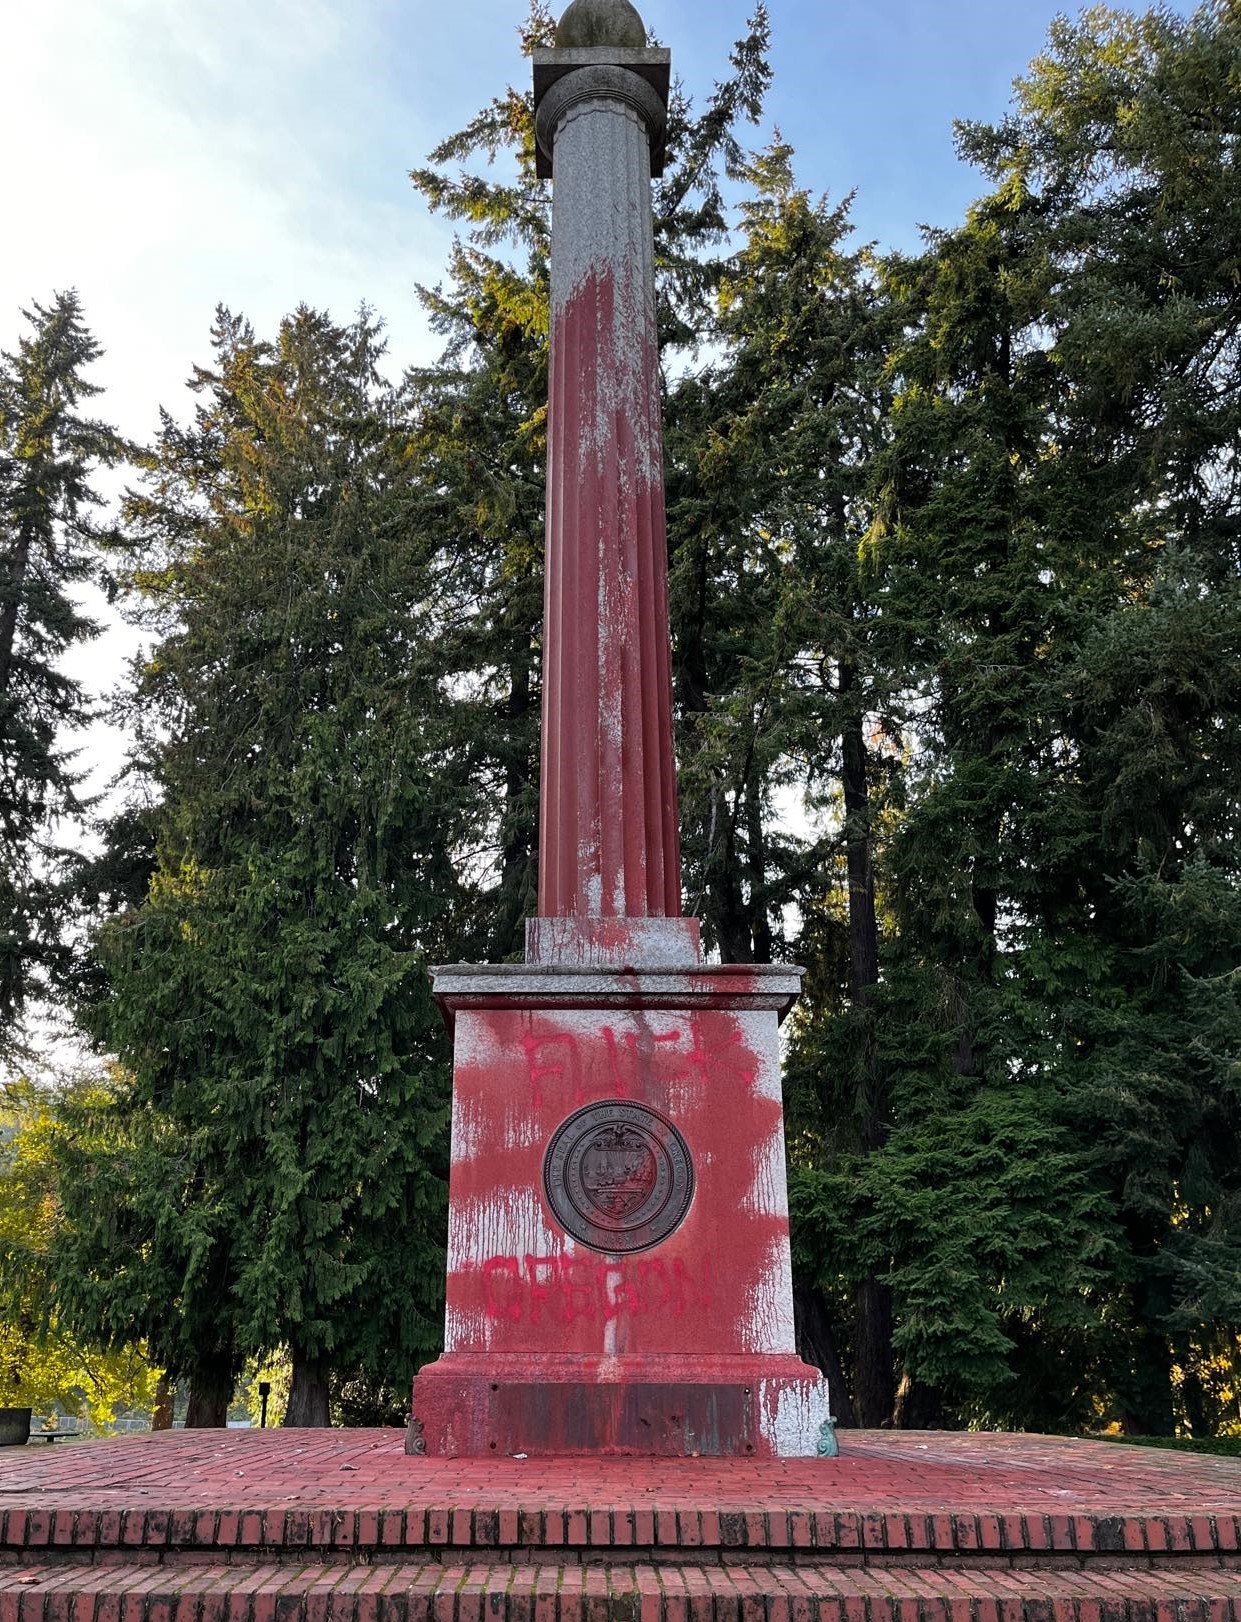 "Lewis and Clark Column" covered in red paint